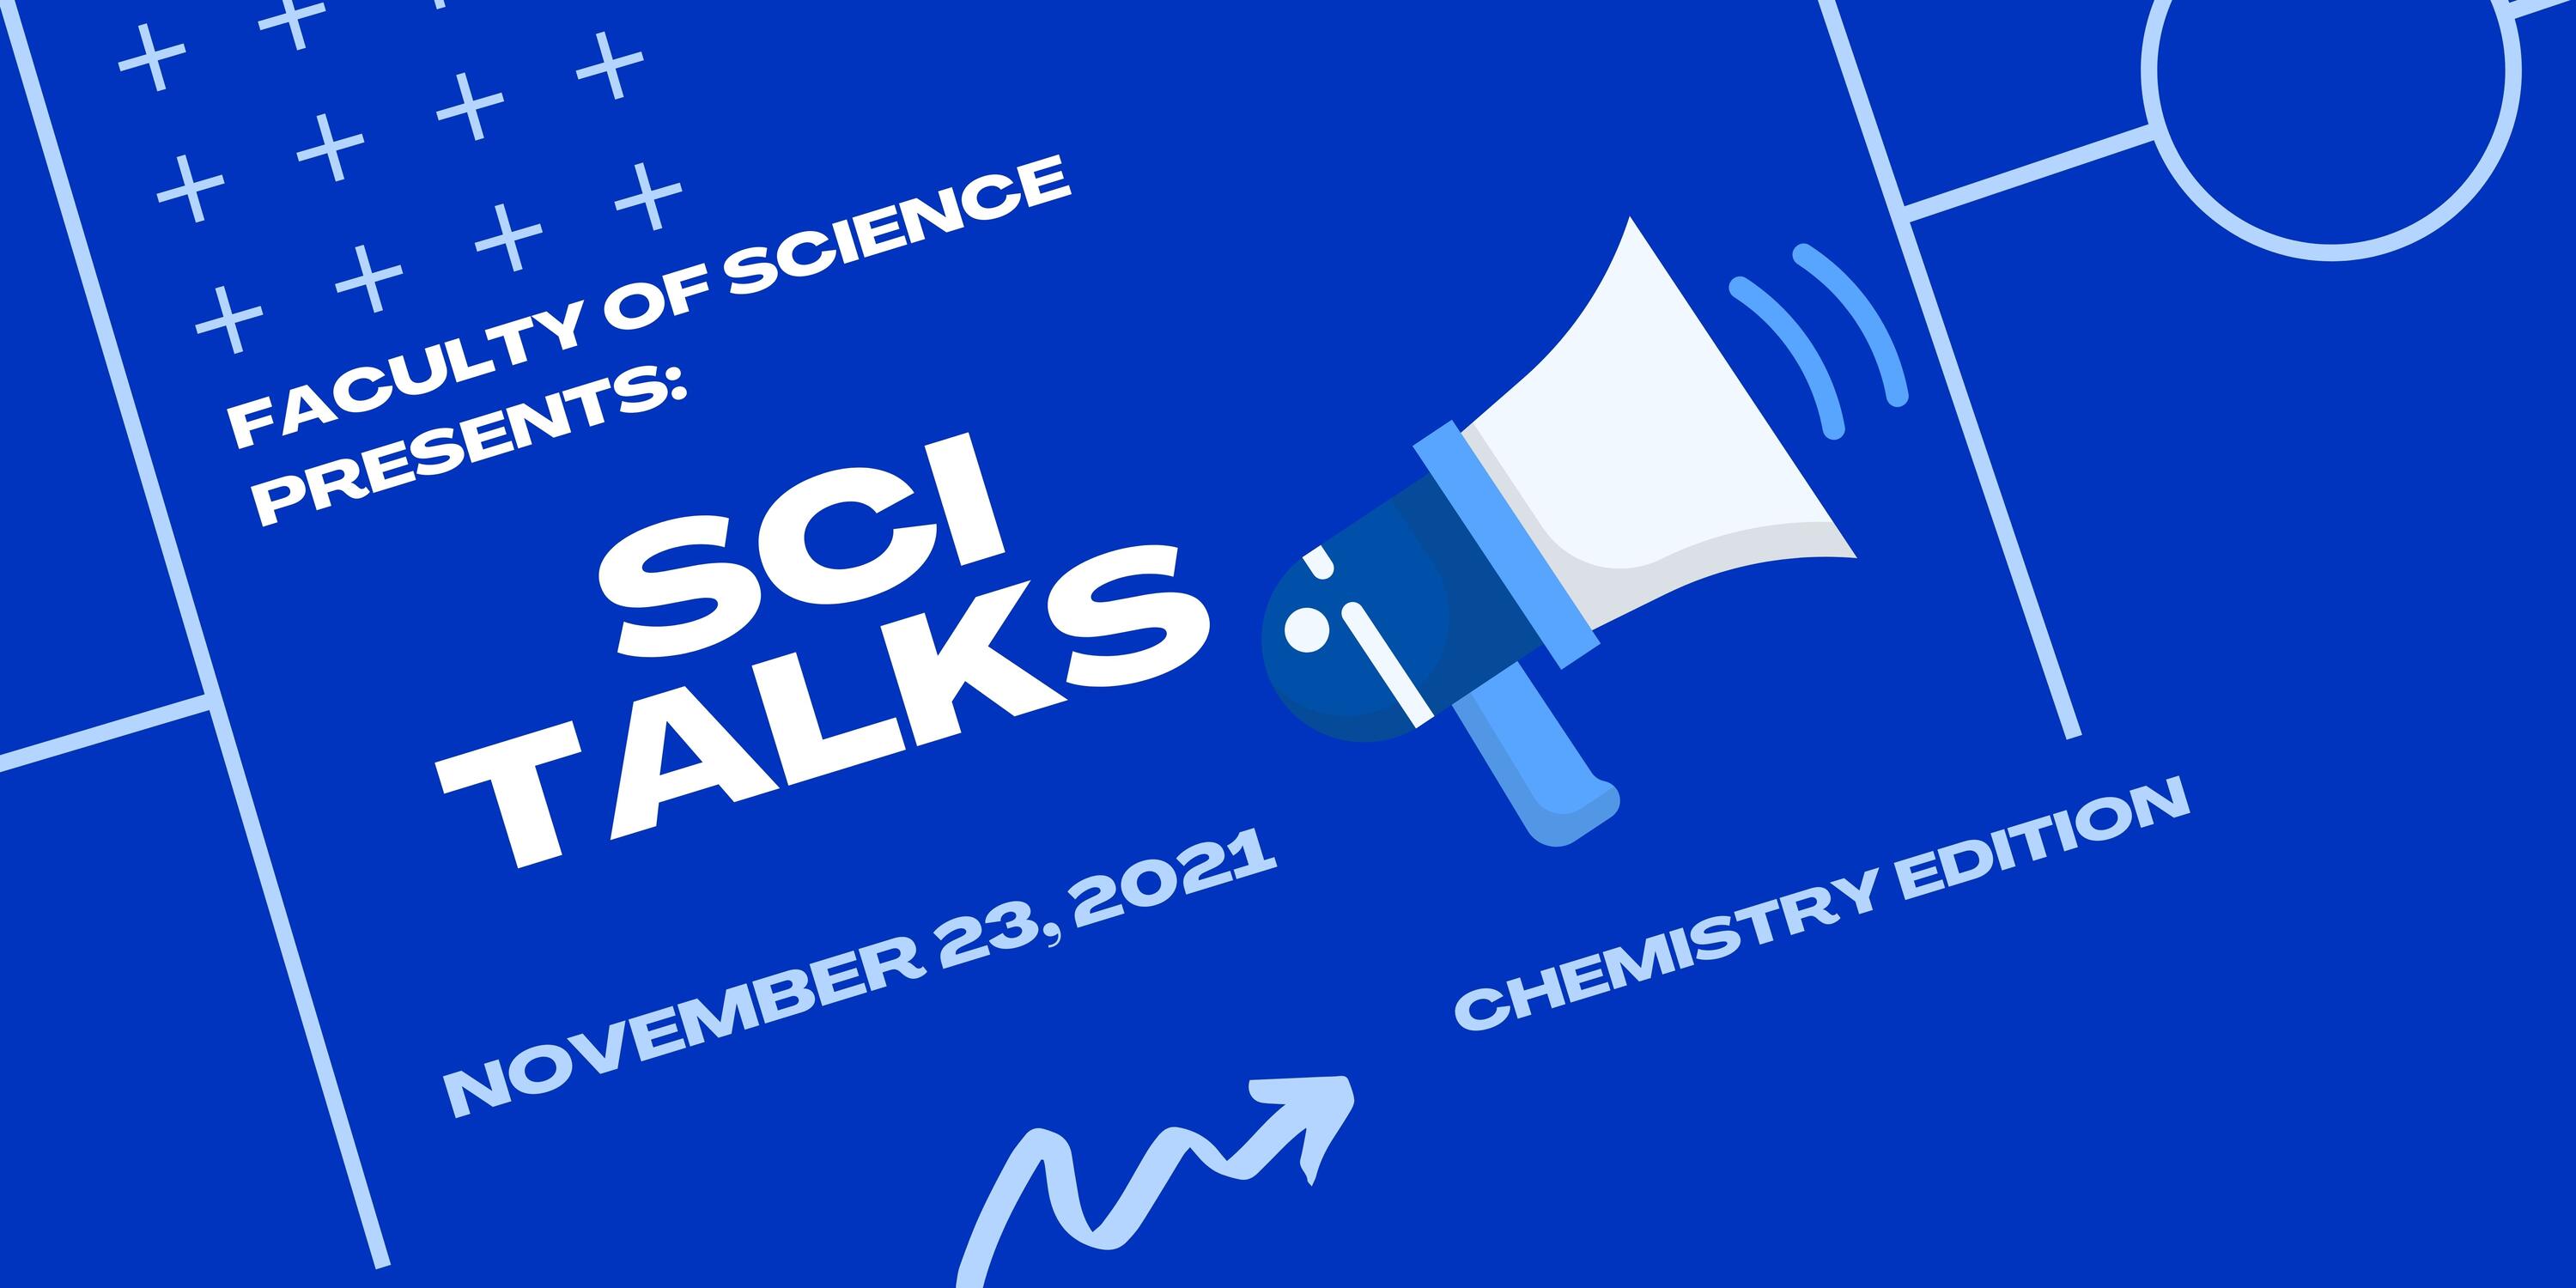 Faculty of Science presents Sci Talks: Chemistry edition November 23, 2021